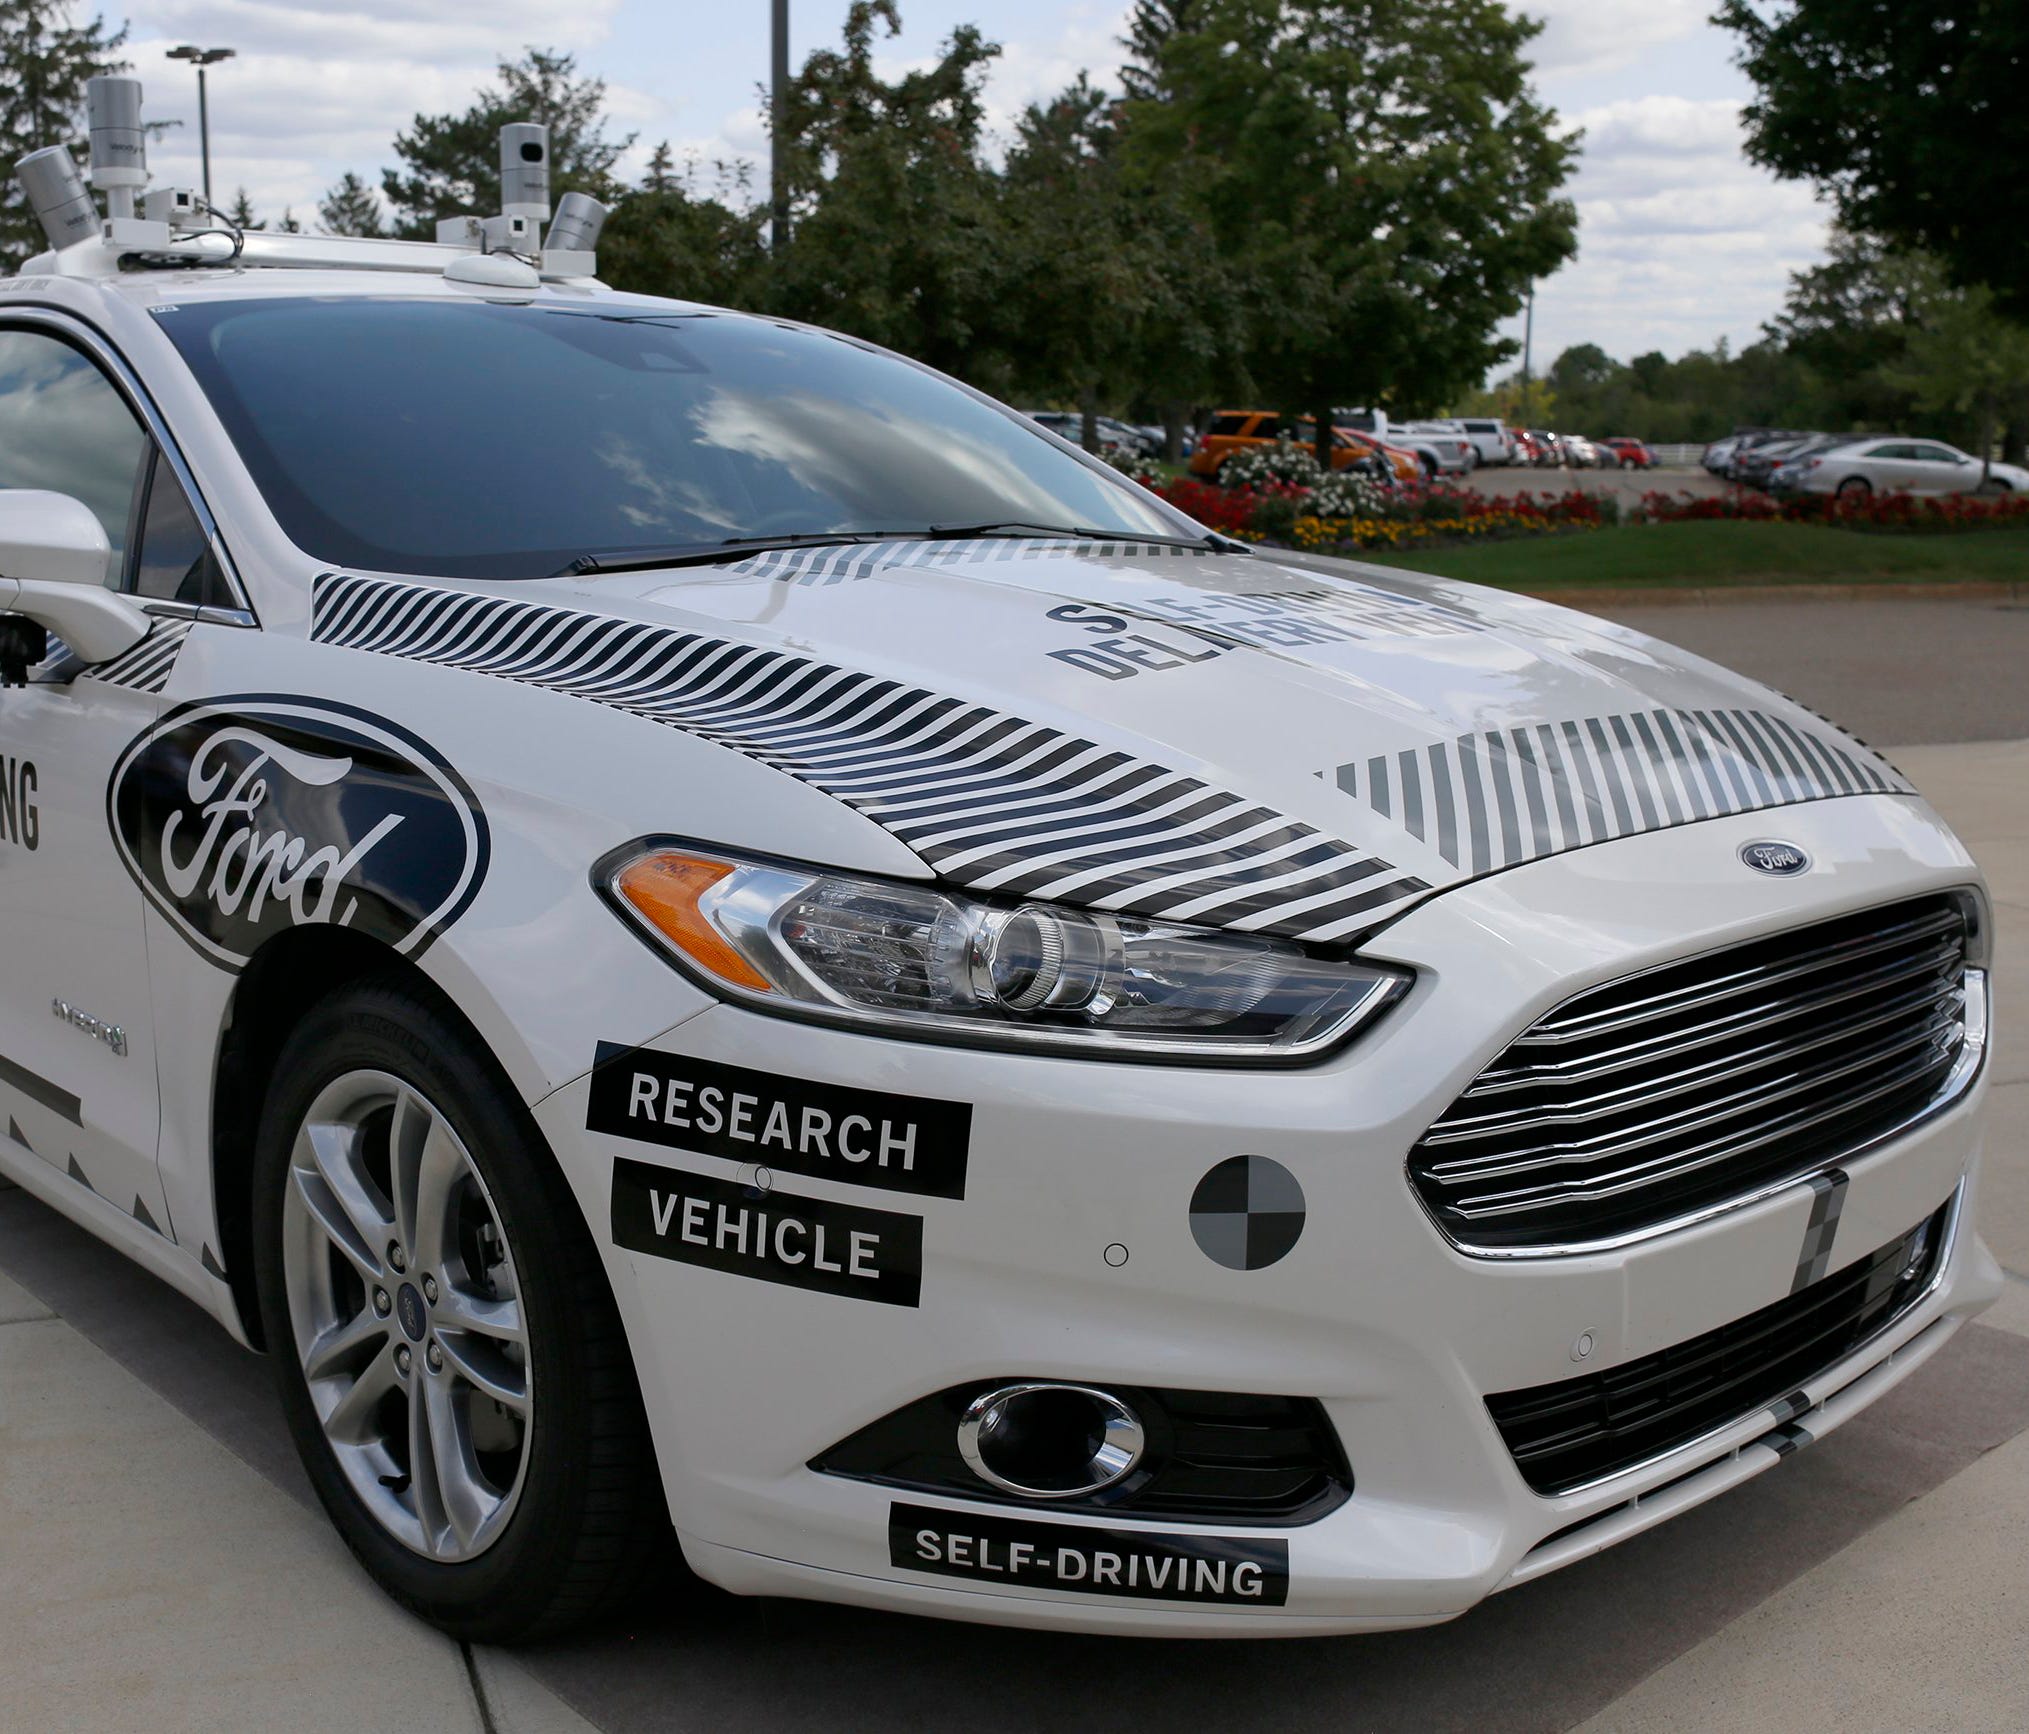 The Ford Fusion hybrid autonomous research vehicle, which will be used as the self-driving pizza delivery vehicle.